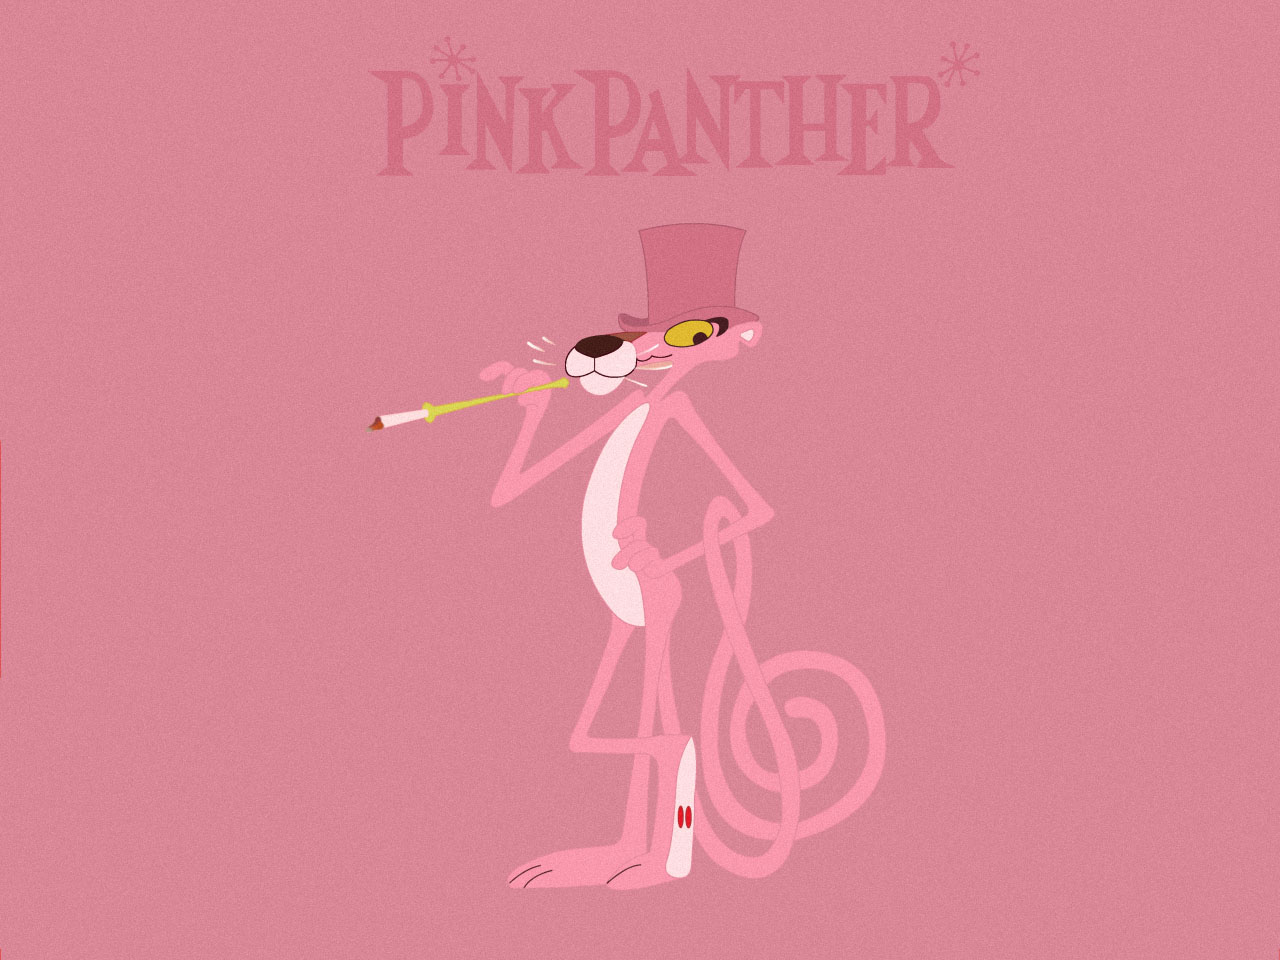 Pink Panther by ZehGuilherme on